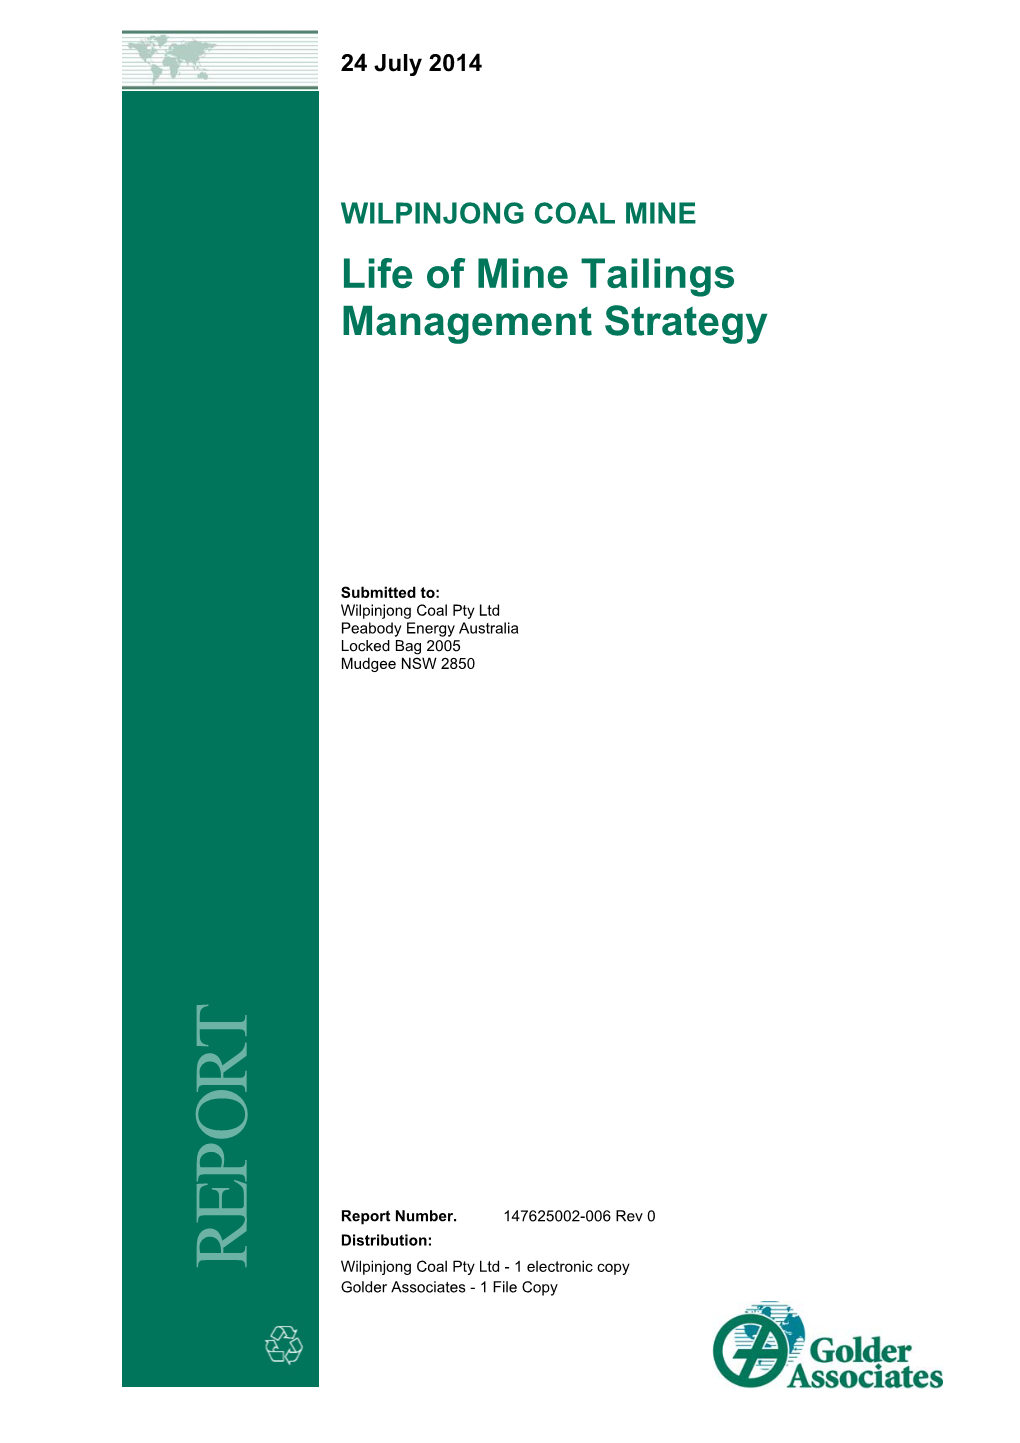 Life of Mine Tailings Management Strategy